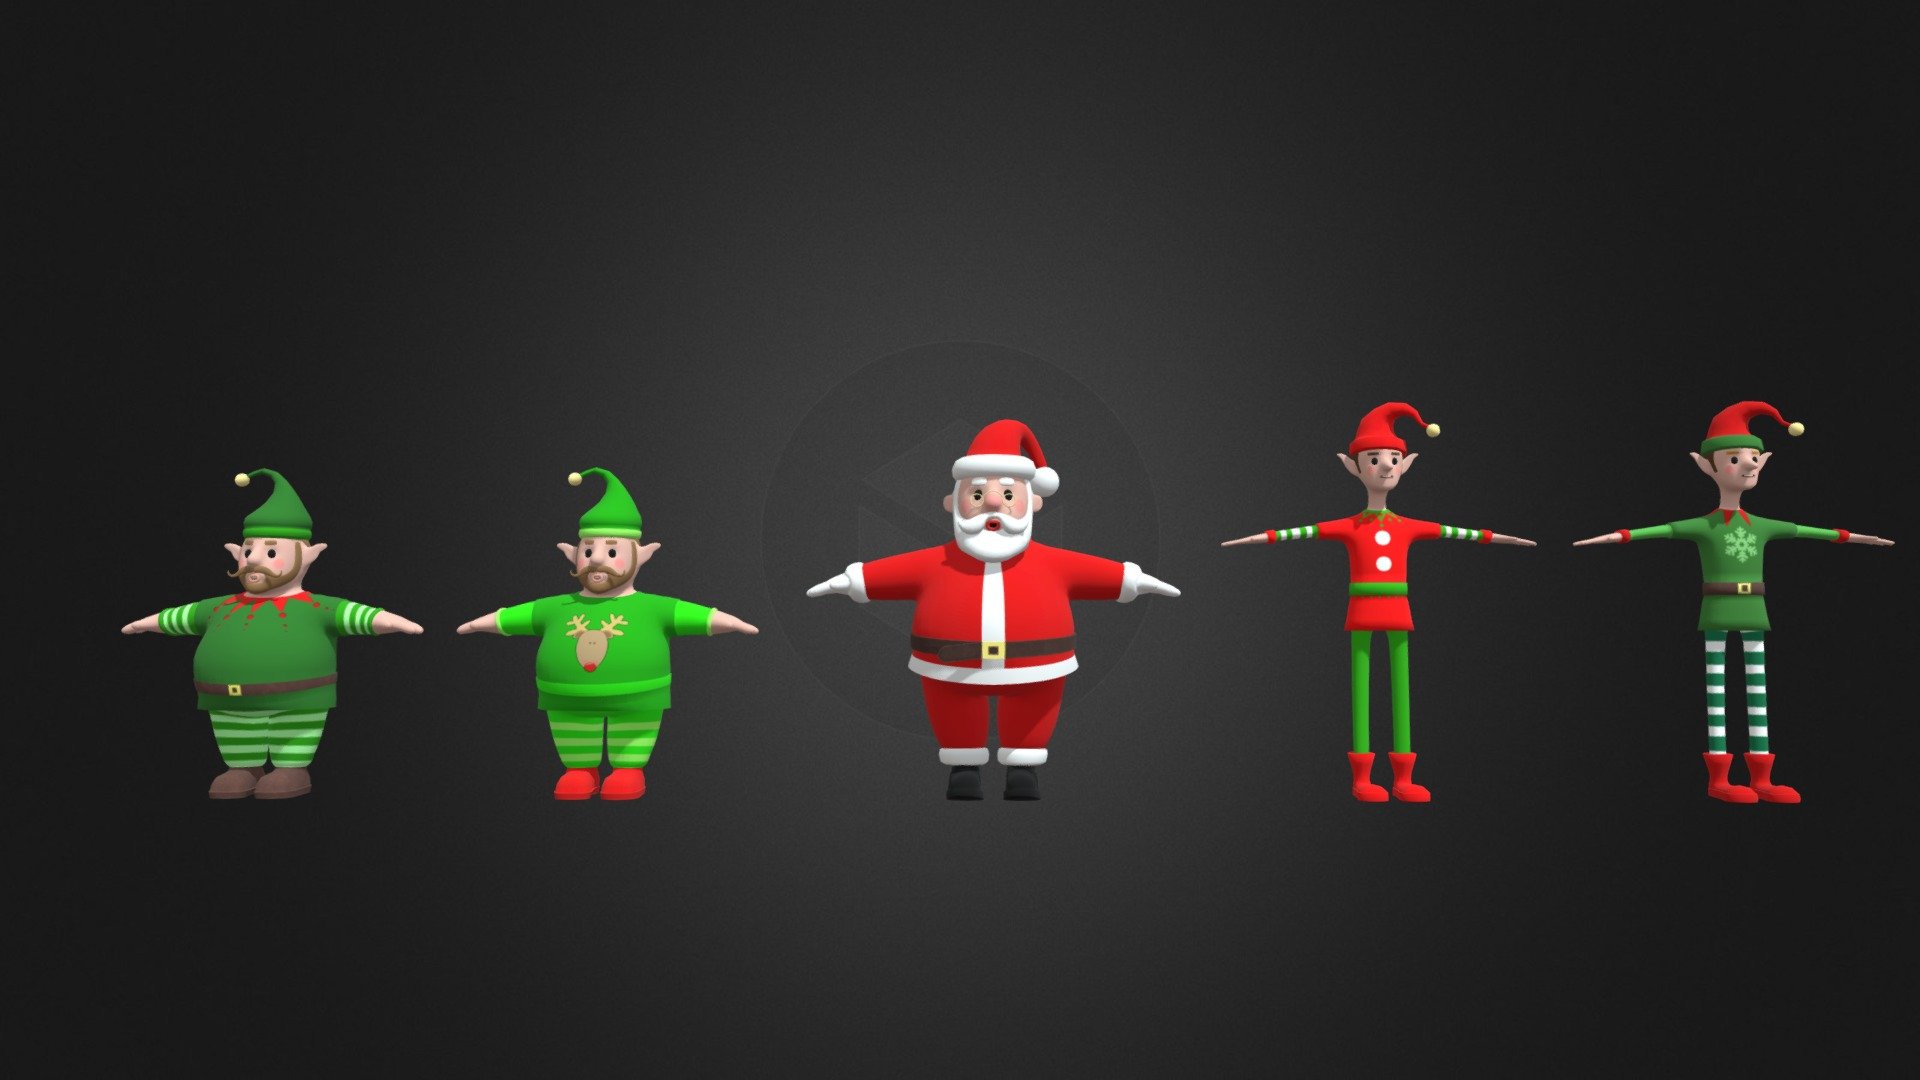 5 Christmas characters for your holiday themed project.
Looking for a festive way to add some holiday cheer to your game or app? Look no further than the Christmas Character Pack!

This pack includes Santa, as well as four different elves (with two textures each). They're perfect for any winter- or holiday-themed project.

Santa is jolly and plump, with a big white beard and a sack full of presents. The elves are cheerful and mischievous, sure to bring a smile to any player's face.

Add them to your Unity scene today and bring some holiday spirit to your players!

We look forward to your feedback so we can create more assets for YOU! - Santa Clause Elfes Characters - Buy Royalty Free 3D model by HayqArt 3d model